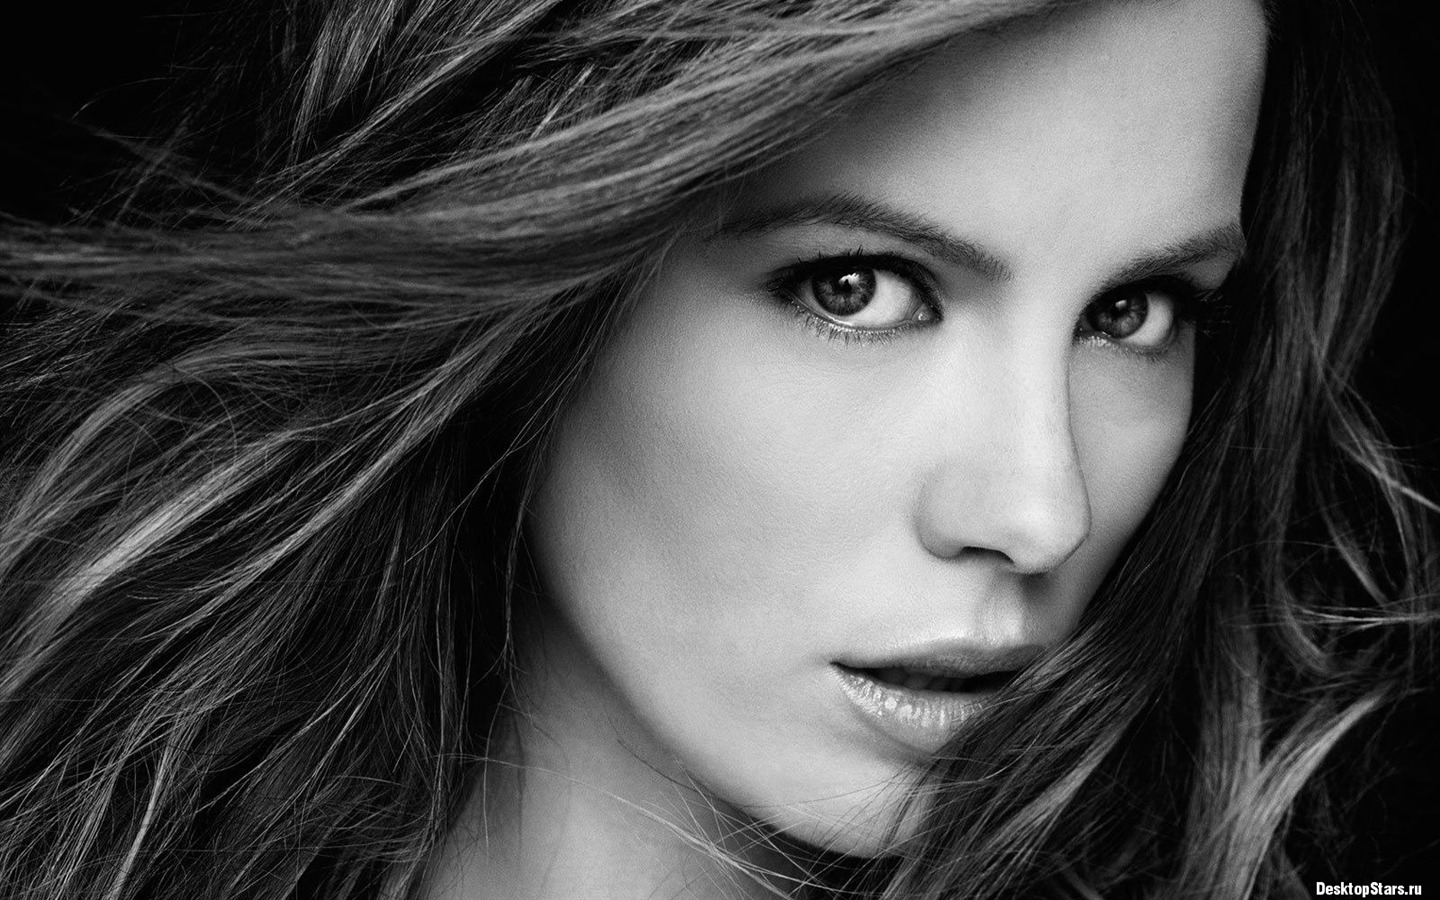 Kate Beckinsale #022 - 1440x900 Wallpapers Pictures Photos Images